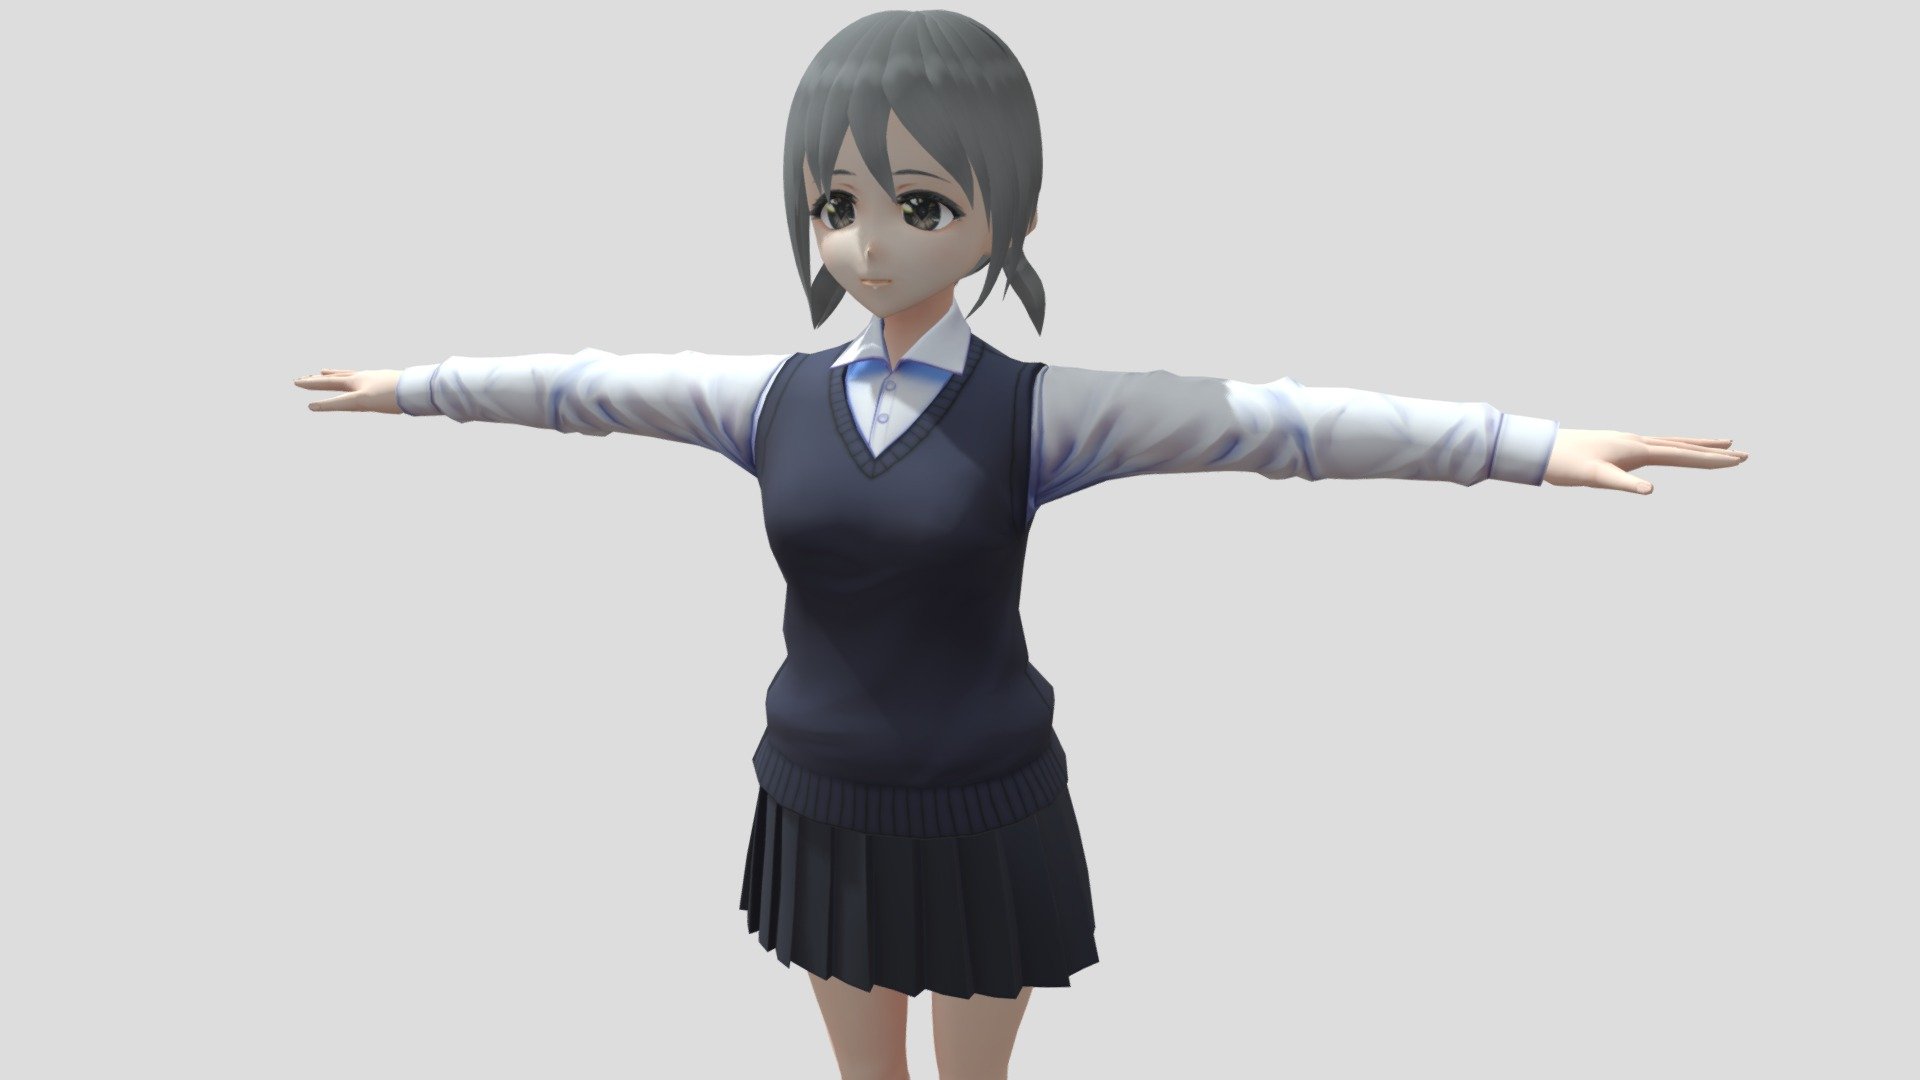 Model preview(14)

Model preview(15)



This character model belongs to Japanese anime style, all models has been converted into fbx file using blender, users can add their favorite animations on mixamo website, then apply to unity versions above 2019



Character : Female014/015

Verts:14688 / 14841

Tris:20886 / 21302

Fifteen textures for the character



This package contains VRM files, which can make the character module more refined, please refer to the manual for details



▶Commercial use allowed

▶Forbid secondary sales



Welcome add my website to credit :

Sketchfab

Pixiv

VRoidHub
 - 【Anime Character】Female14/15 (Discount/Unity 3D) - Buy Royalty Free 3D model by 3D動漫風角色屋 / 3D Anime Character Store (@alex94i60) 3d model